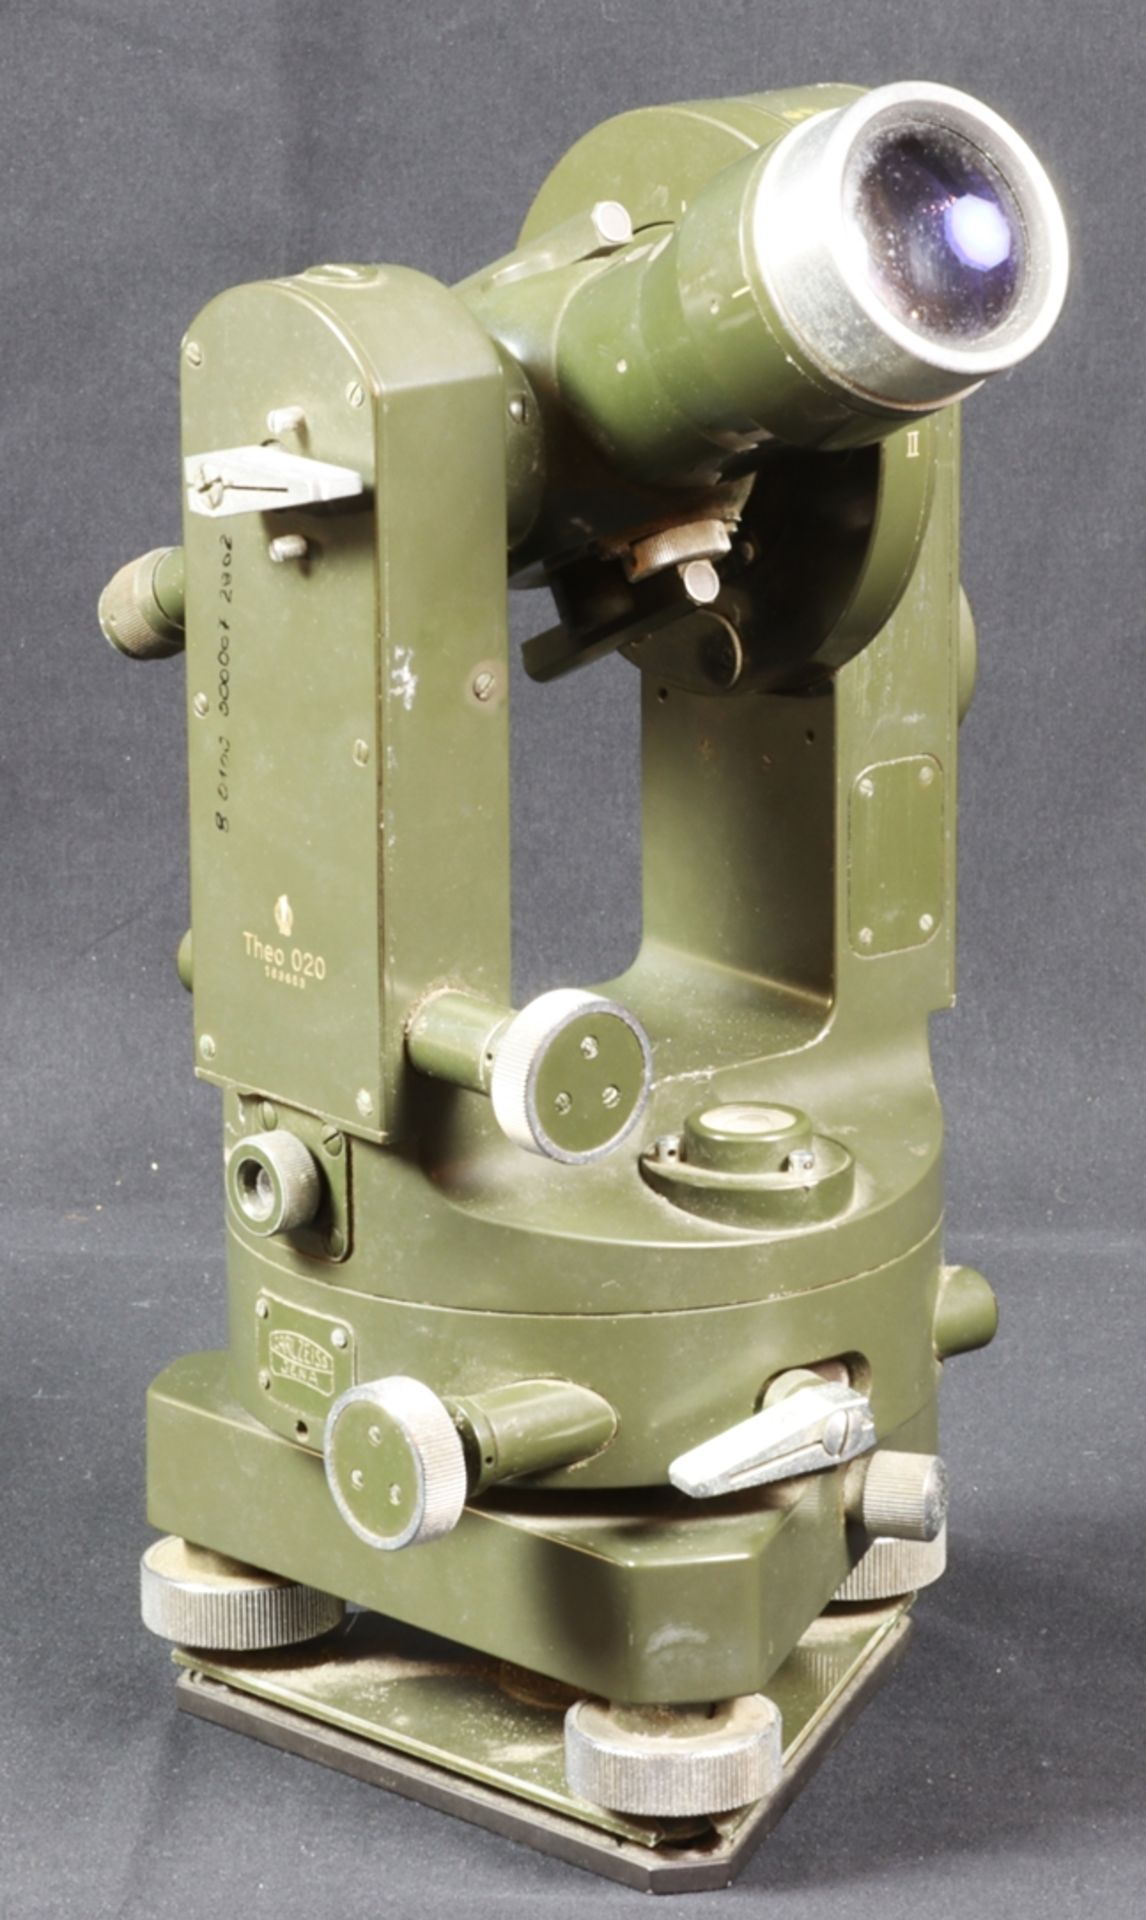 Theodolite Military measuring device, Carl-Zeiss-Jena 50s of the 20th century, GDR